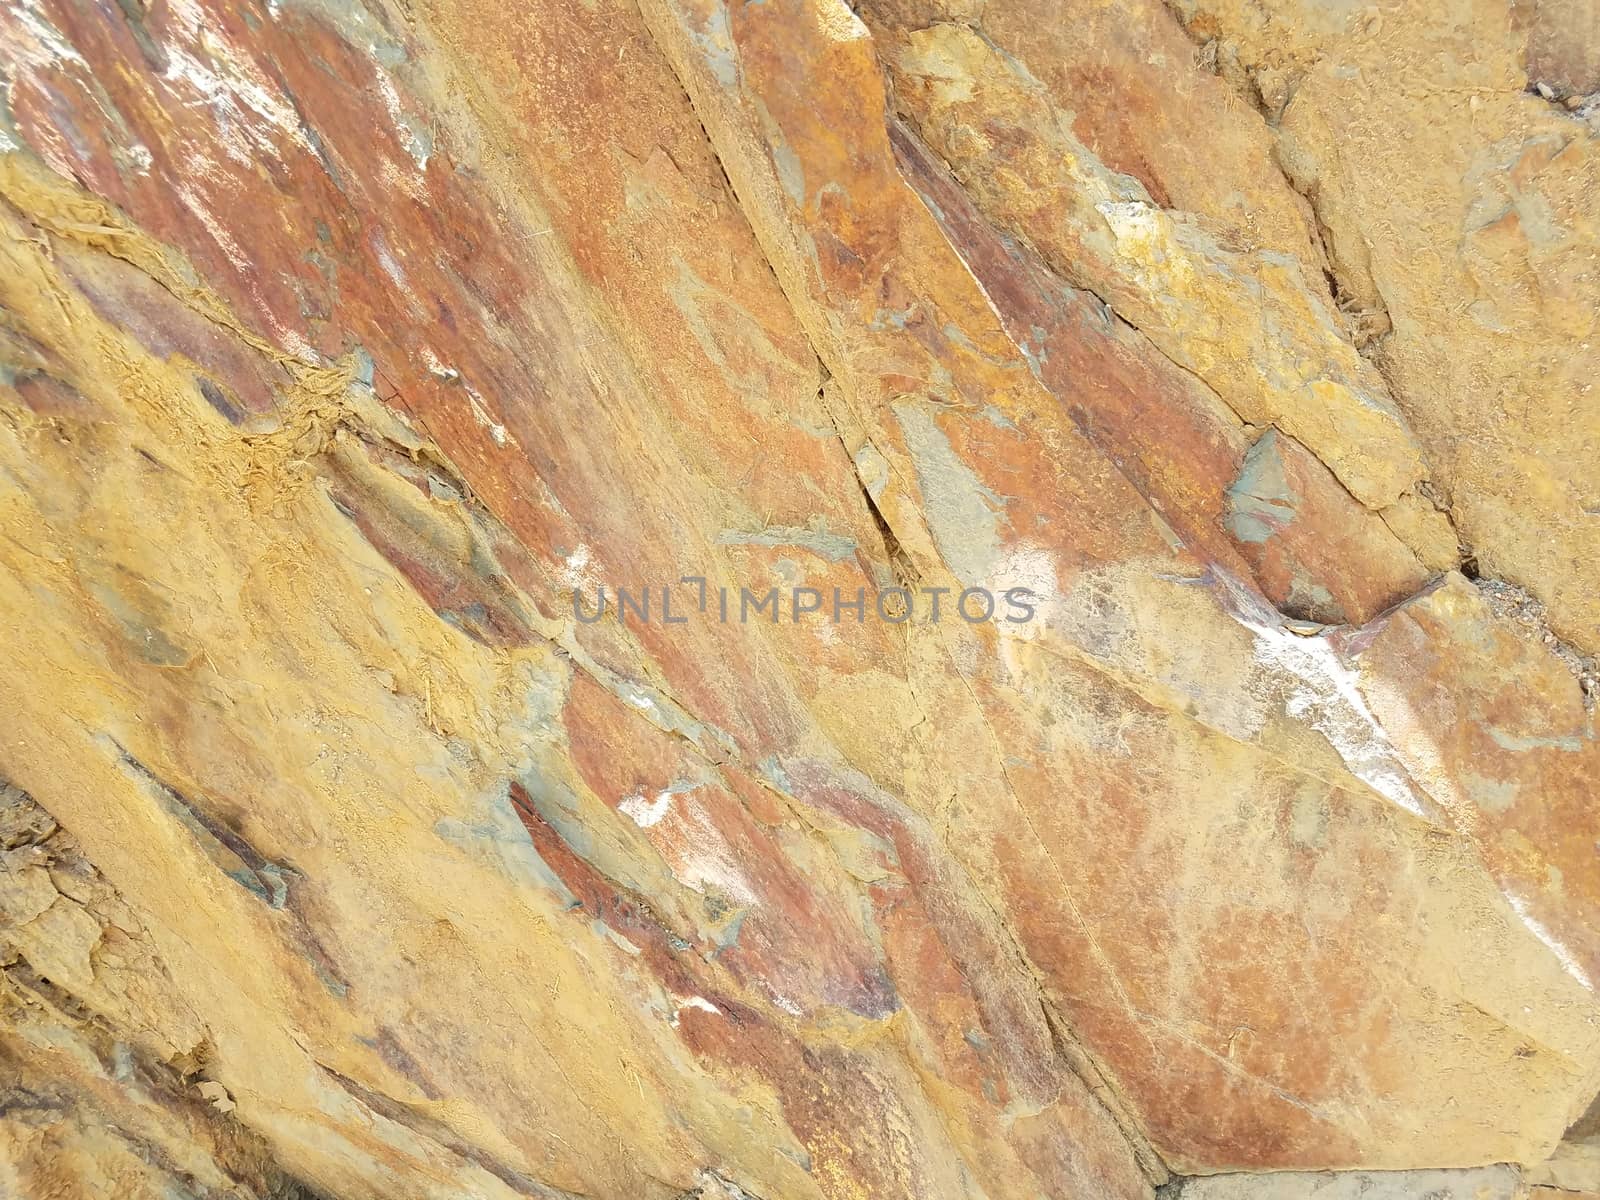 red and grey rock or boulder or stone outdoor geology by stockphotofan1